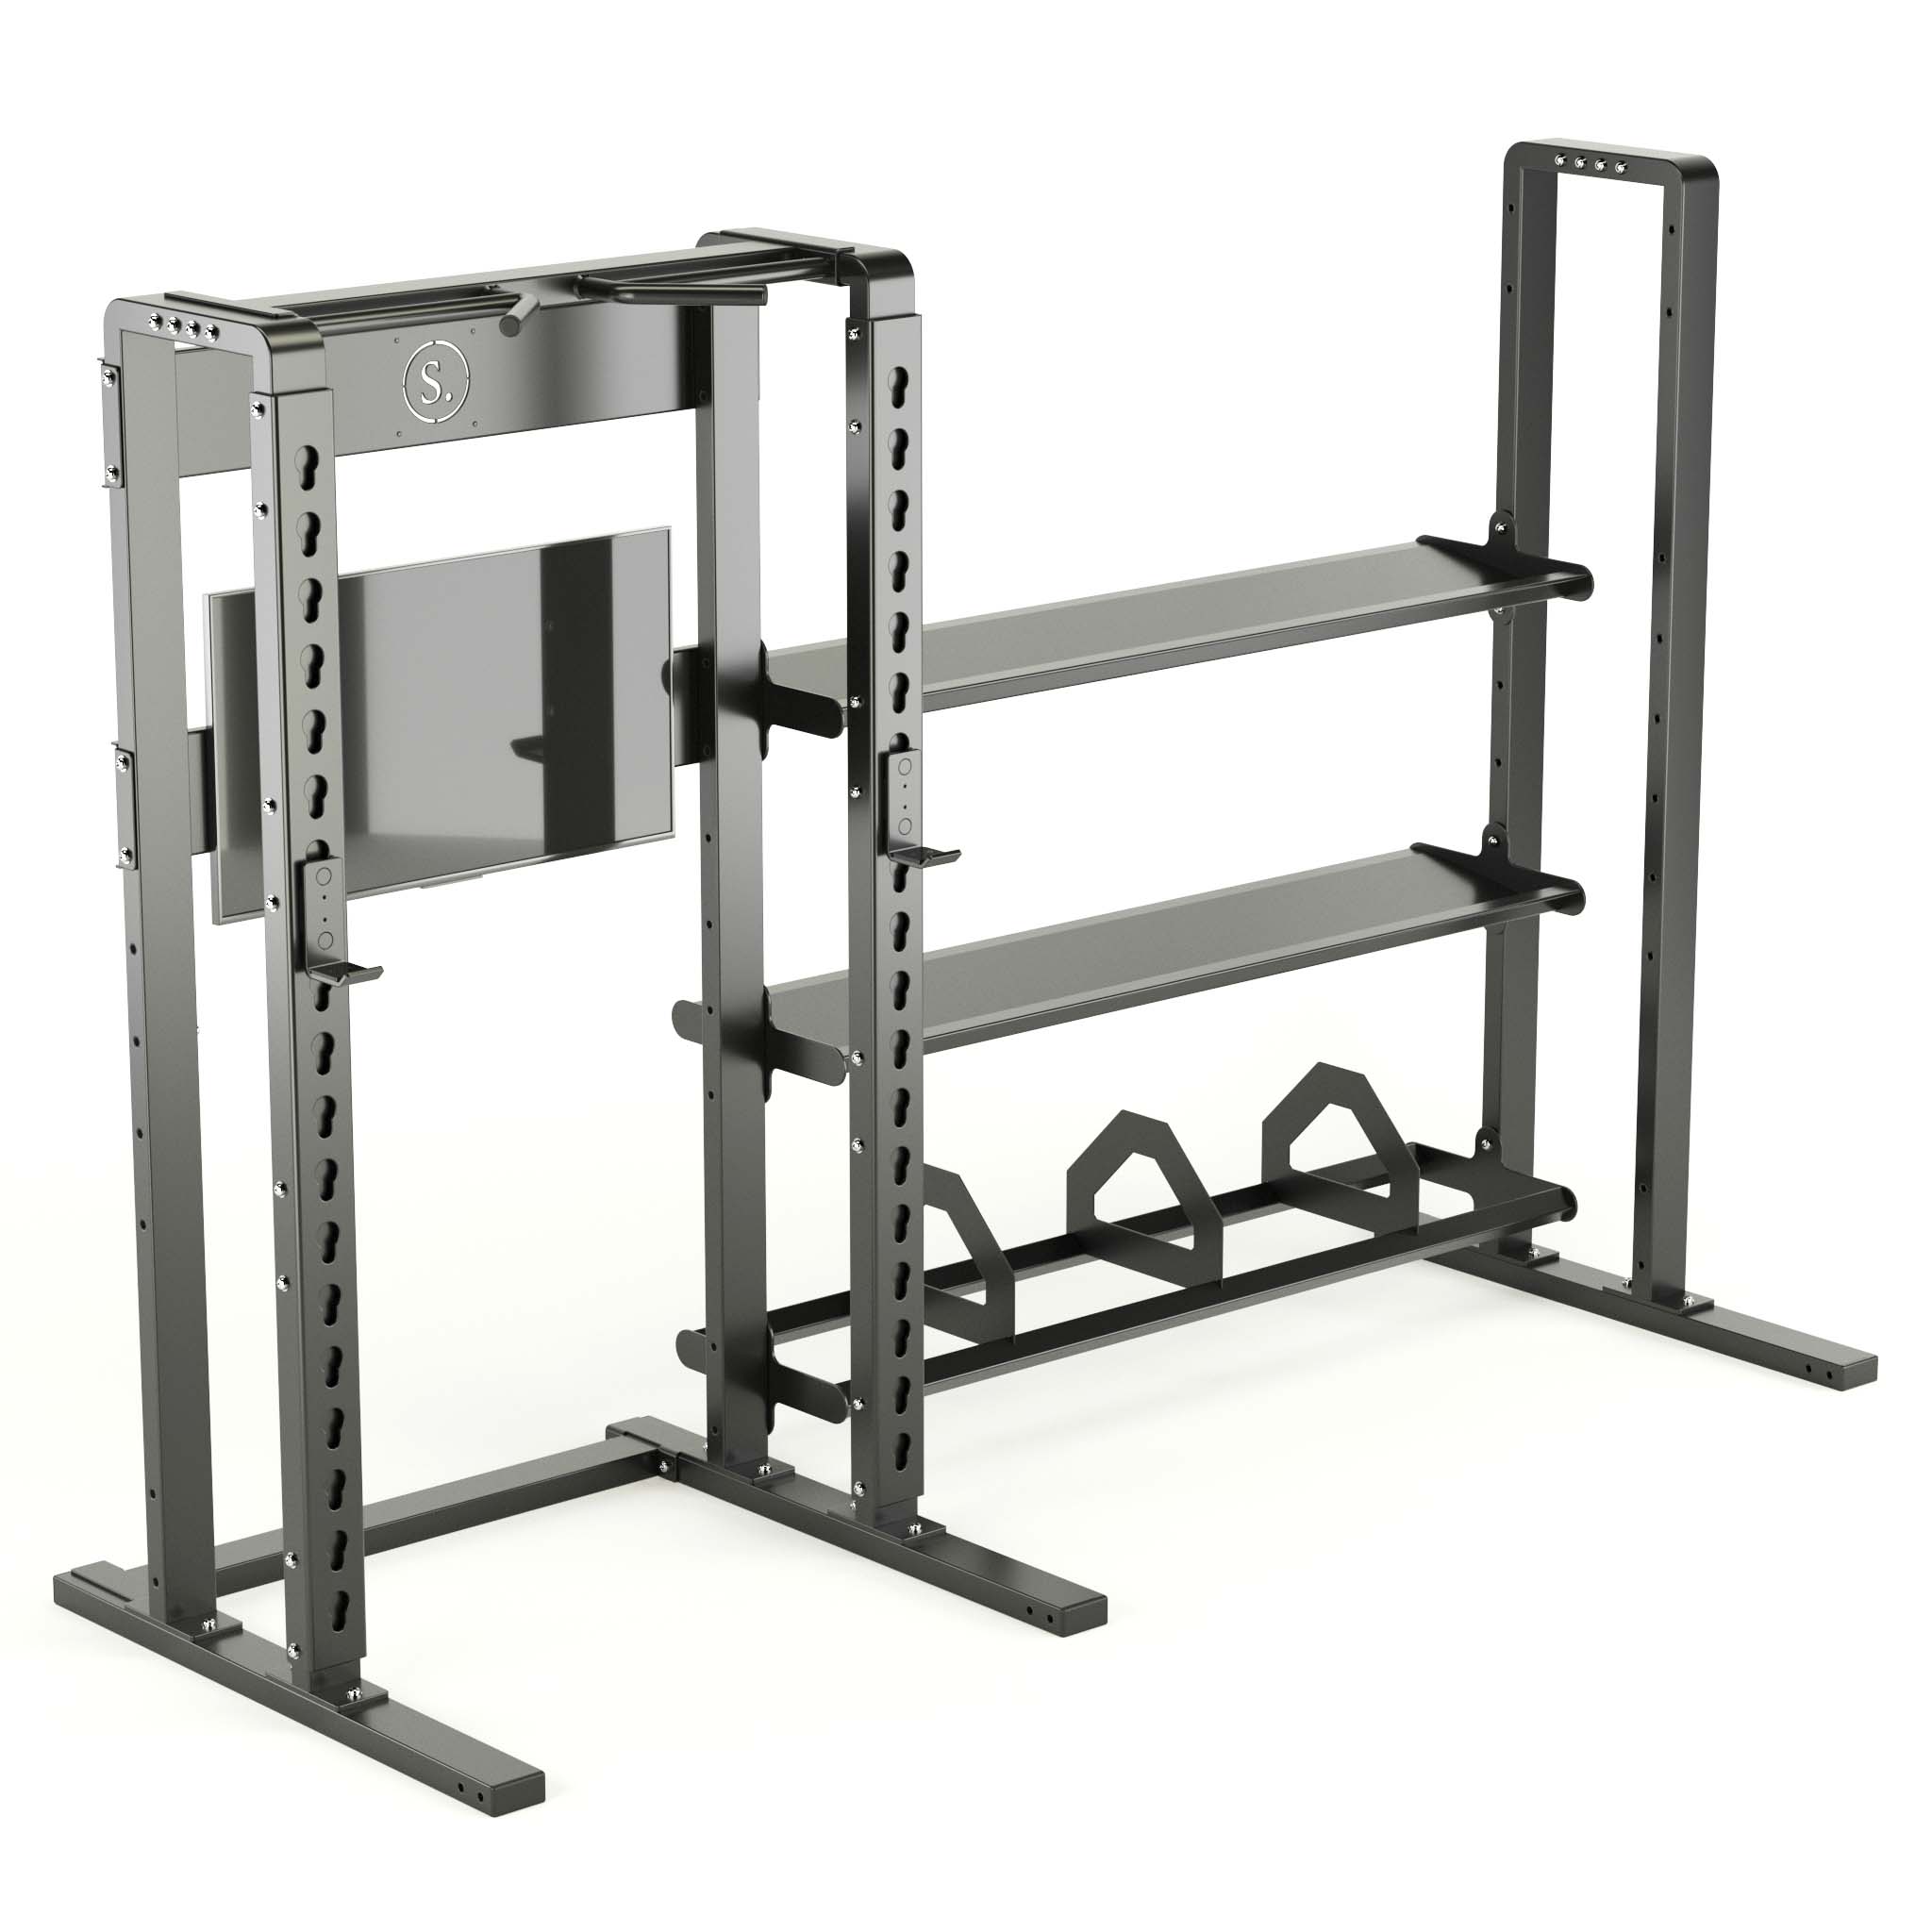 Solo Half Rack Plus with wide storage in black